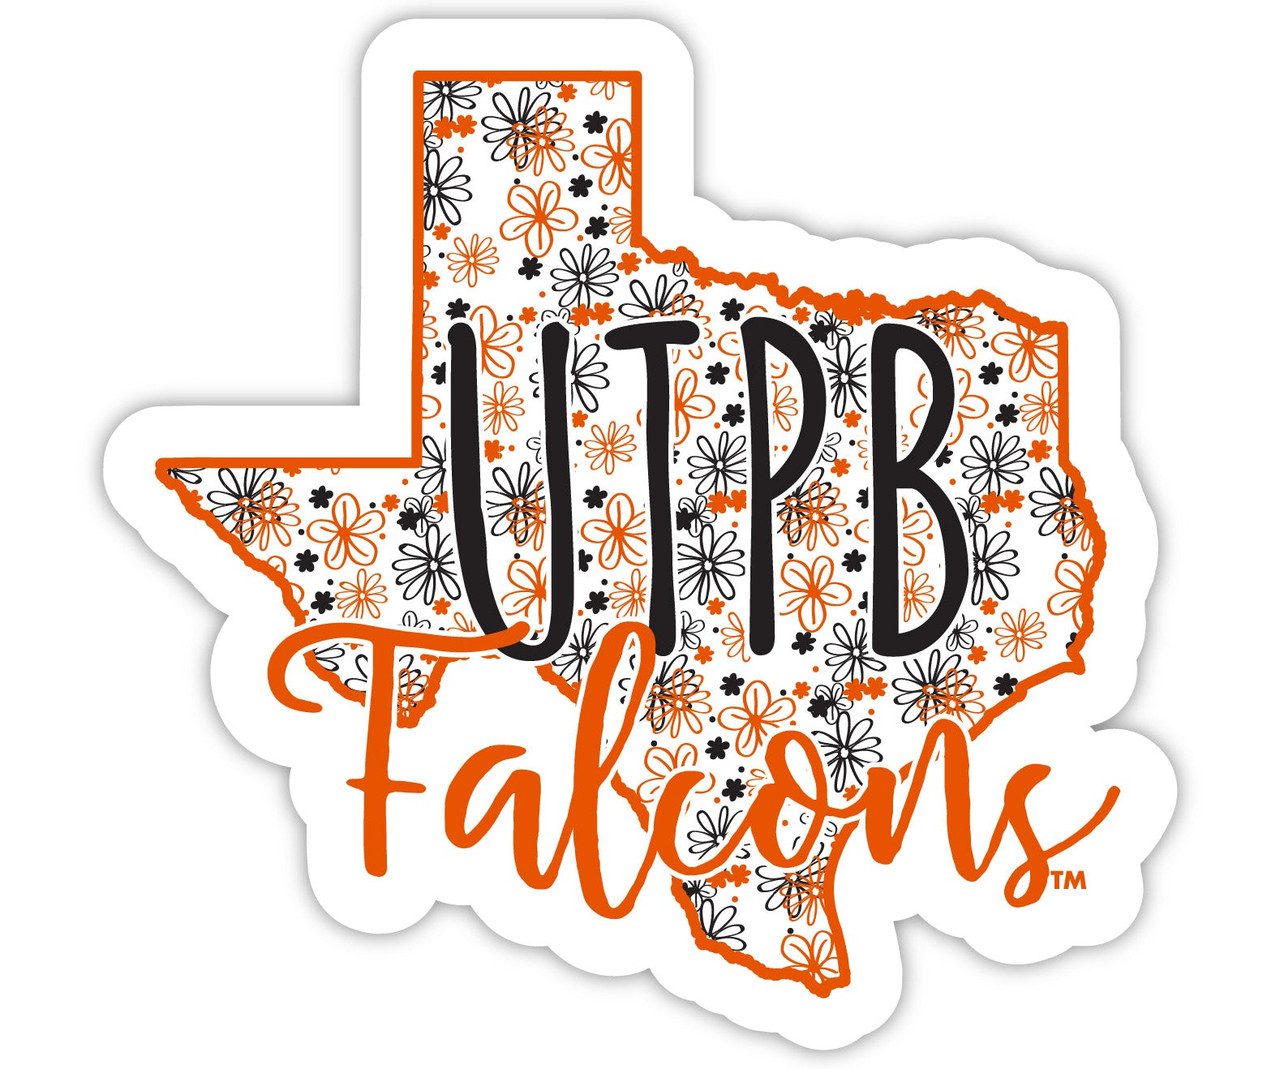 University of Texas of The Permian Basin Floral State Die Cut Decal 2-Inch